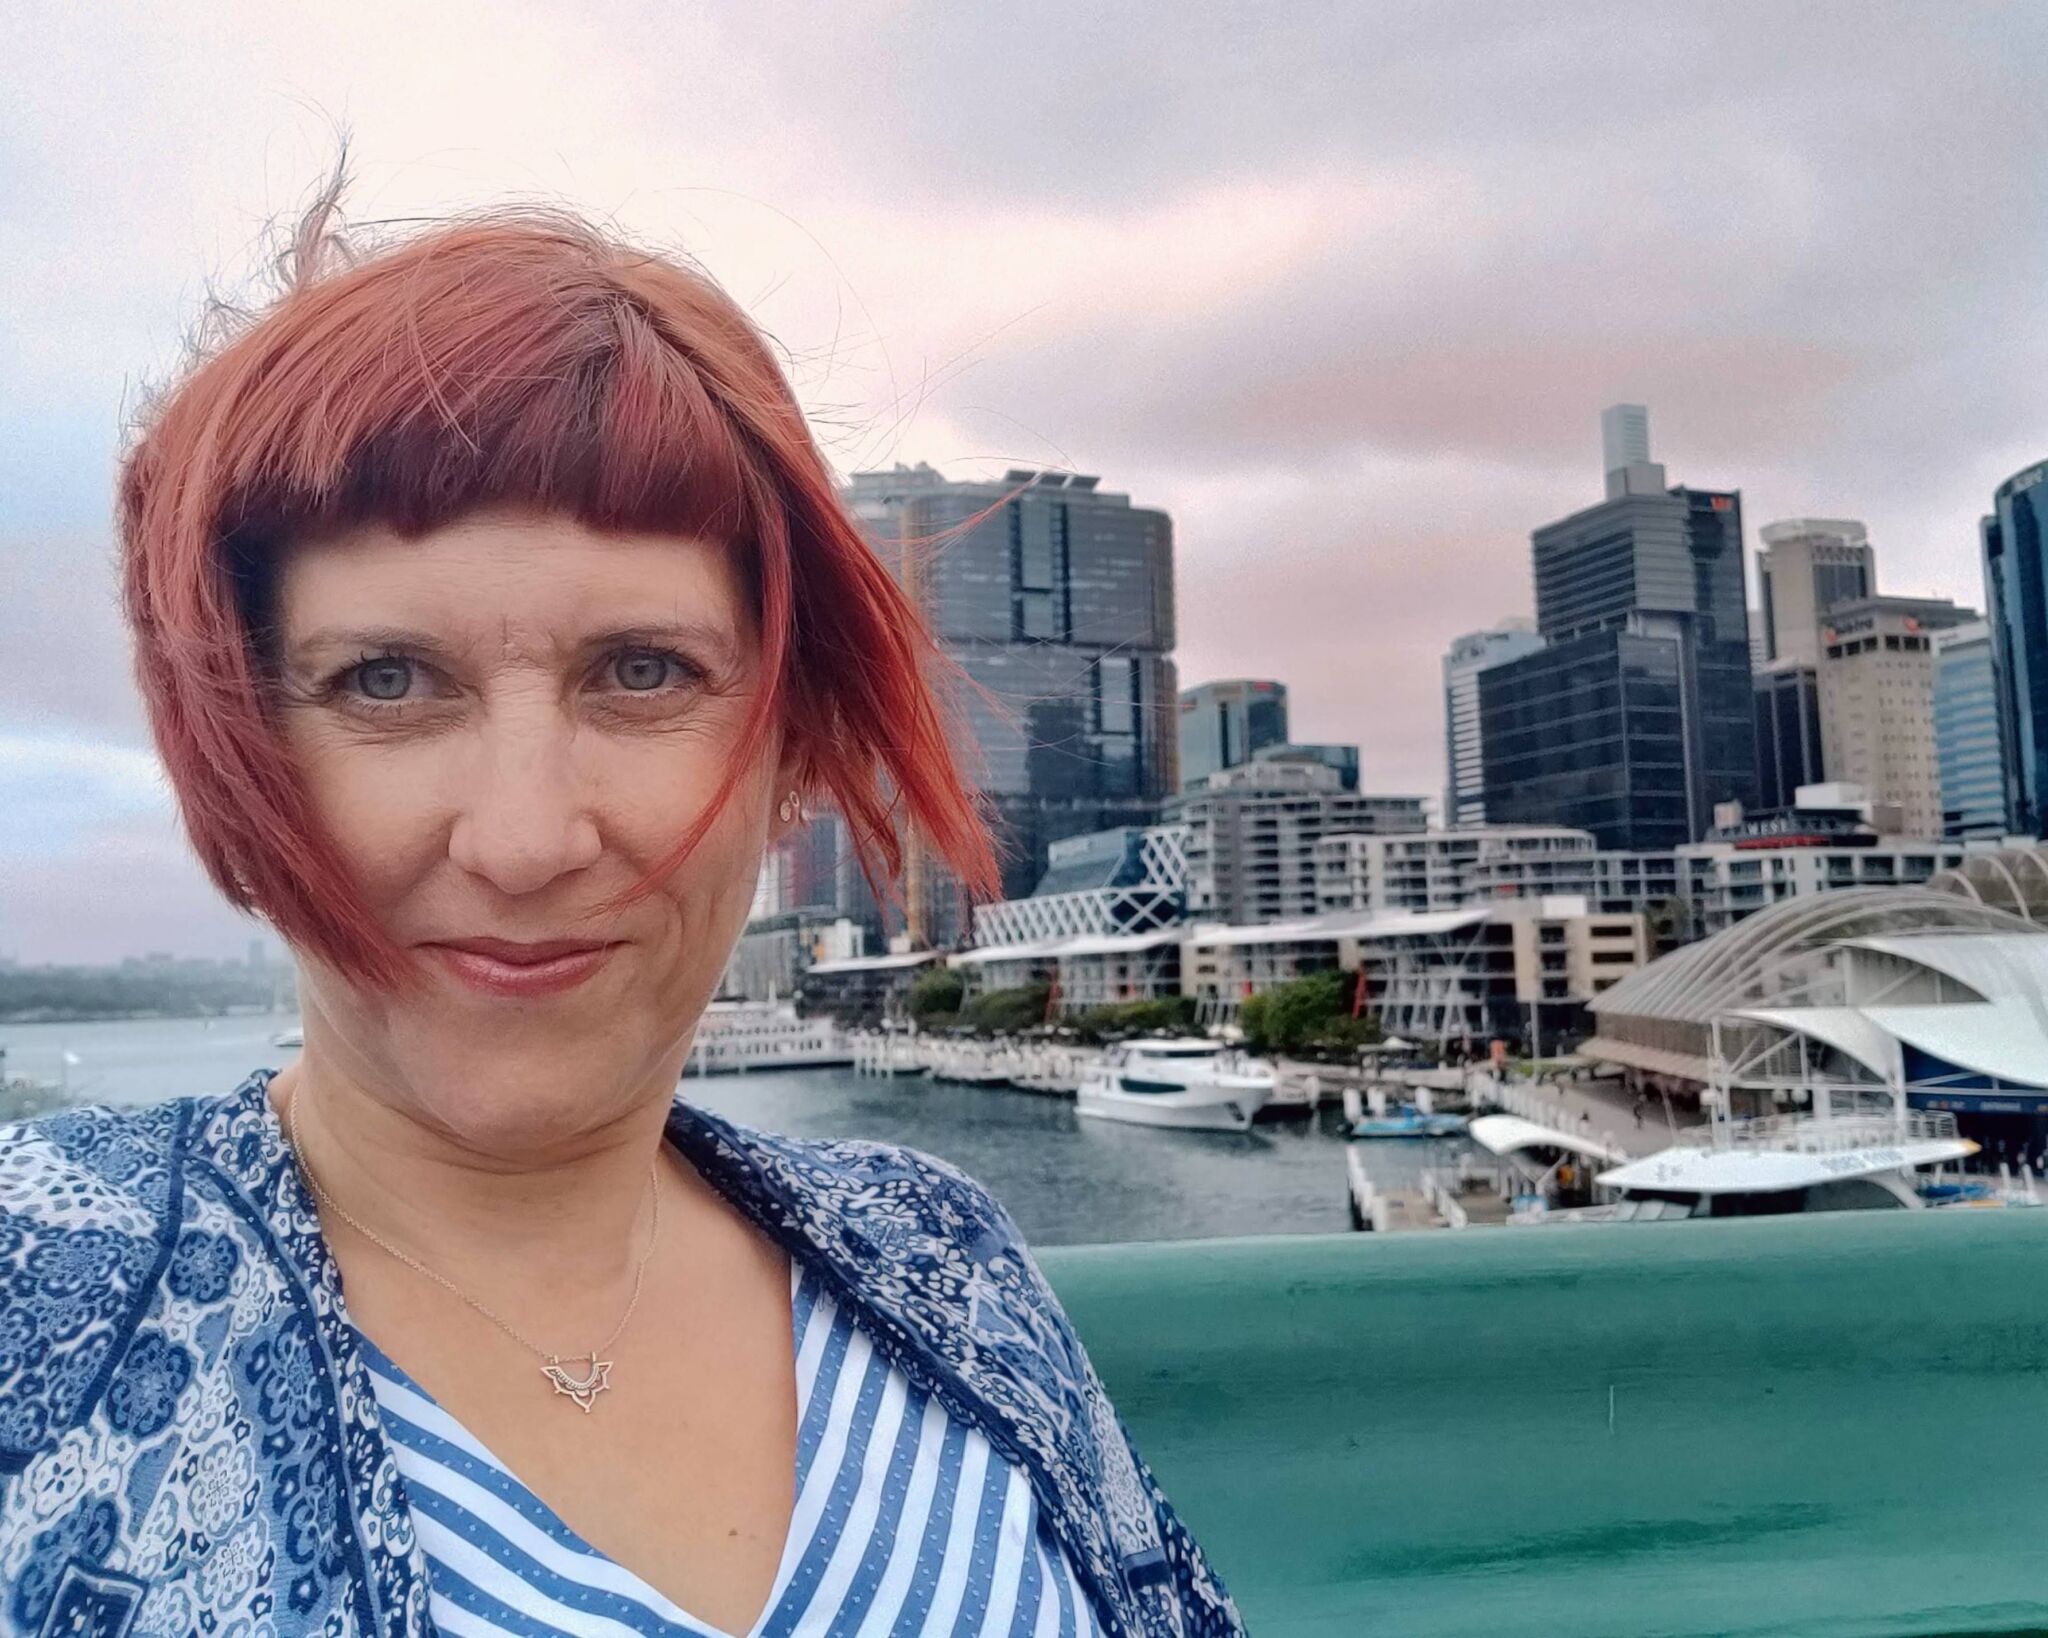 Pic of me on a boat in Sydney harbour